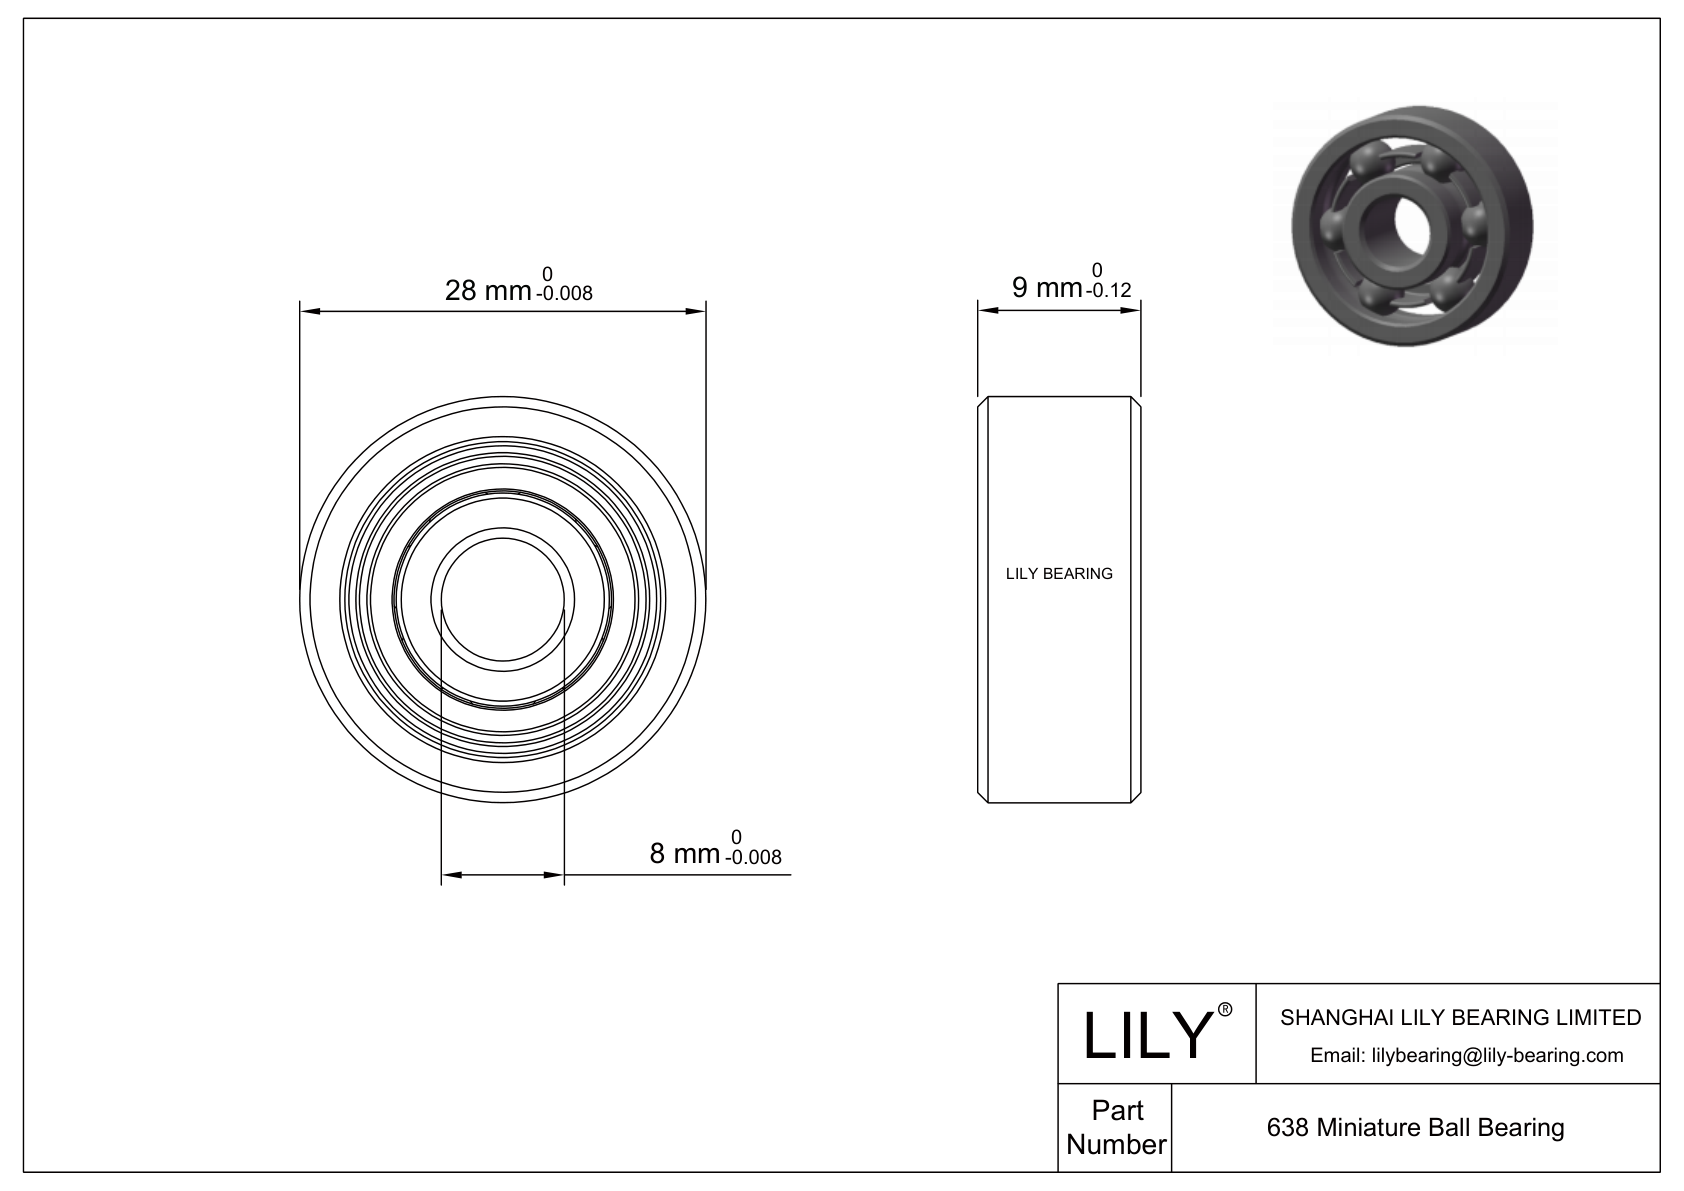 LILY-BS63840-20 POM Coated Bearing cad drawing